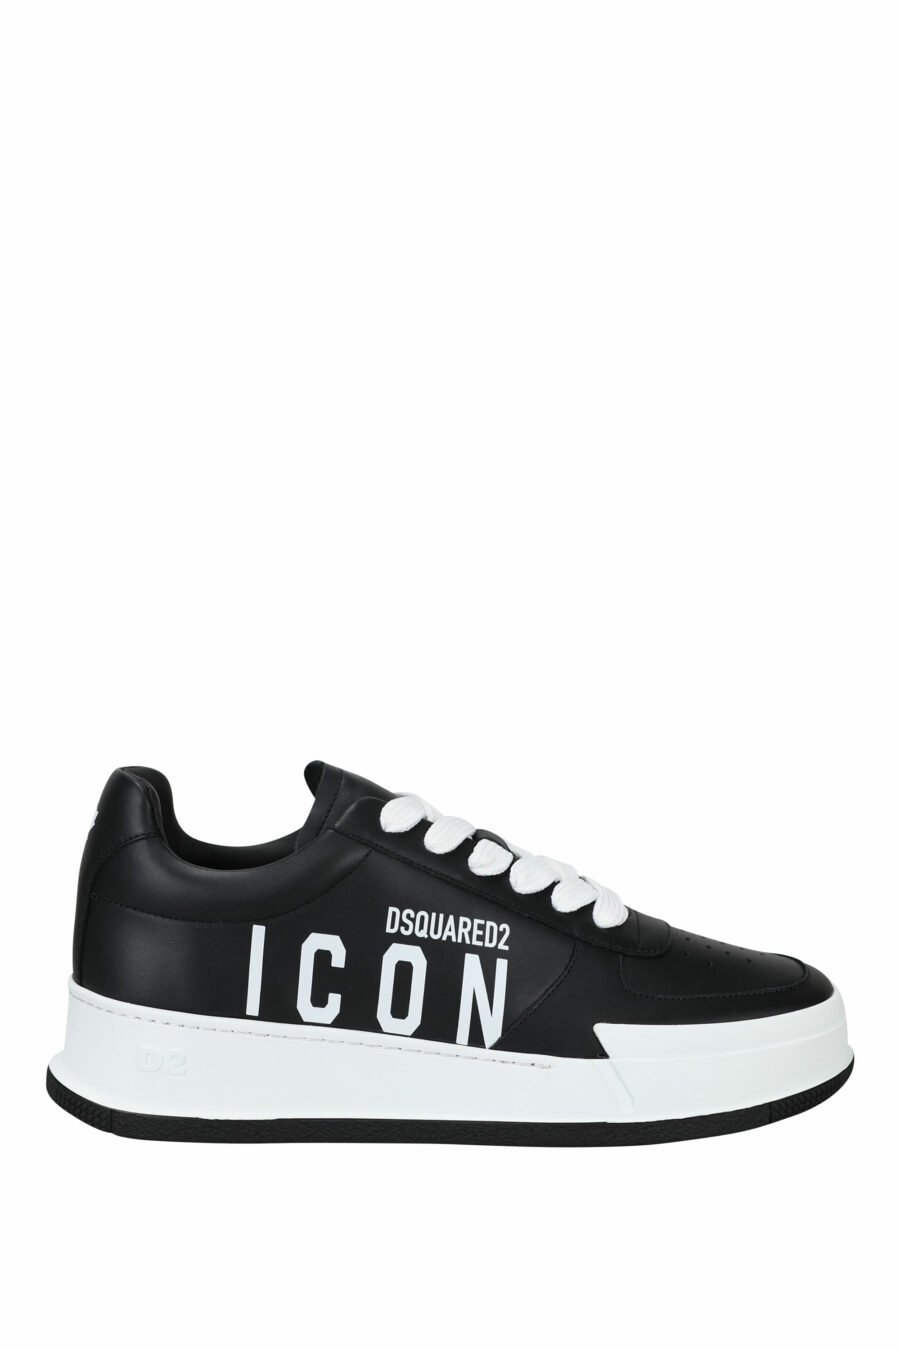 Black trainers with "icon" logo and white sole - 8055777248911